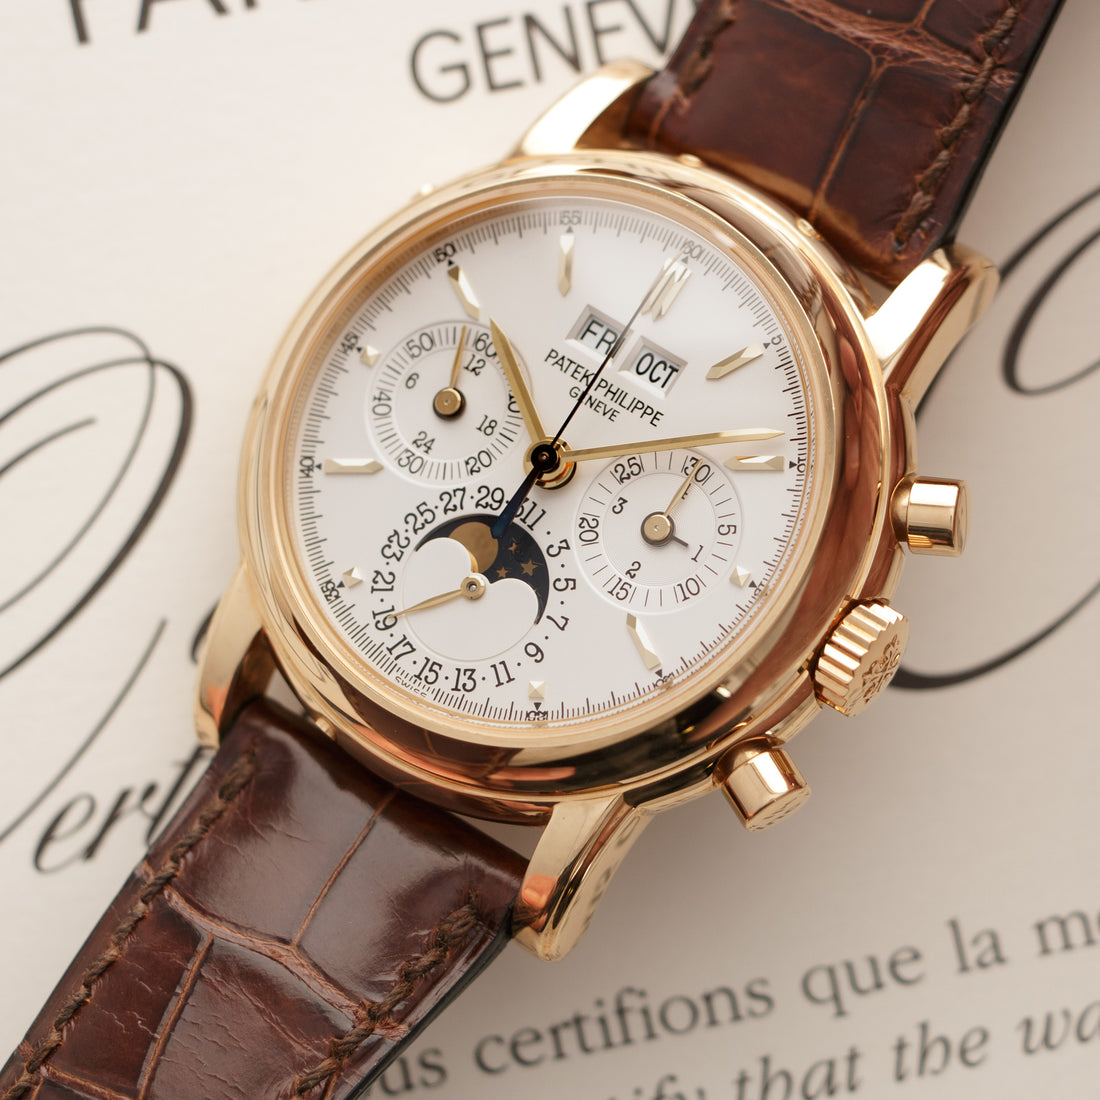 Patek Philippe Perpetual Calendar Chrono 3970EJ-014 18k YG  Fantastic Original Condition with Clear, Deep Hallmarks Unisex 18k YG Silver 36 mm Manual Undated Original Brown Patek Philippe Strap Box, Certificate, and Additional Solid Case Back 